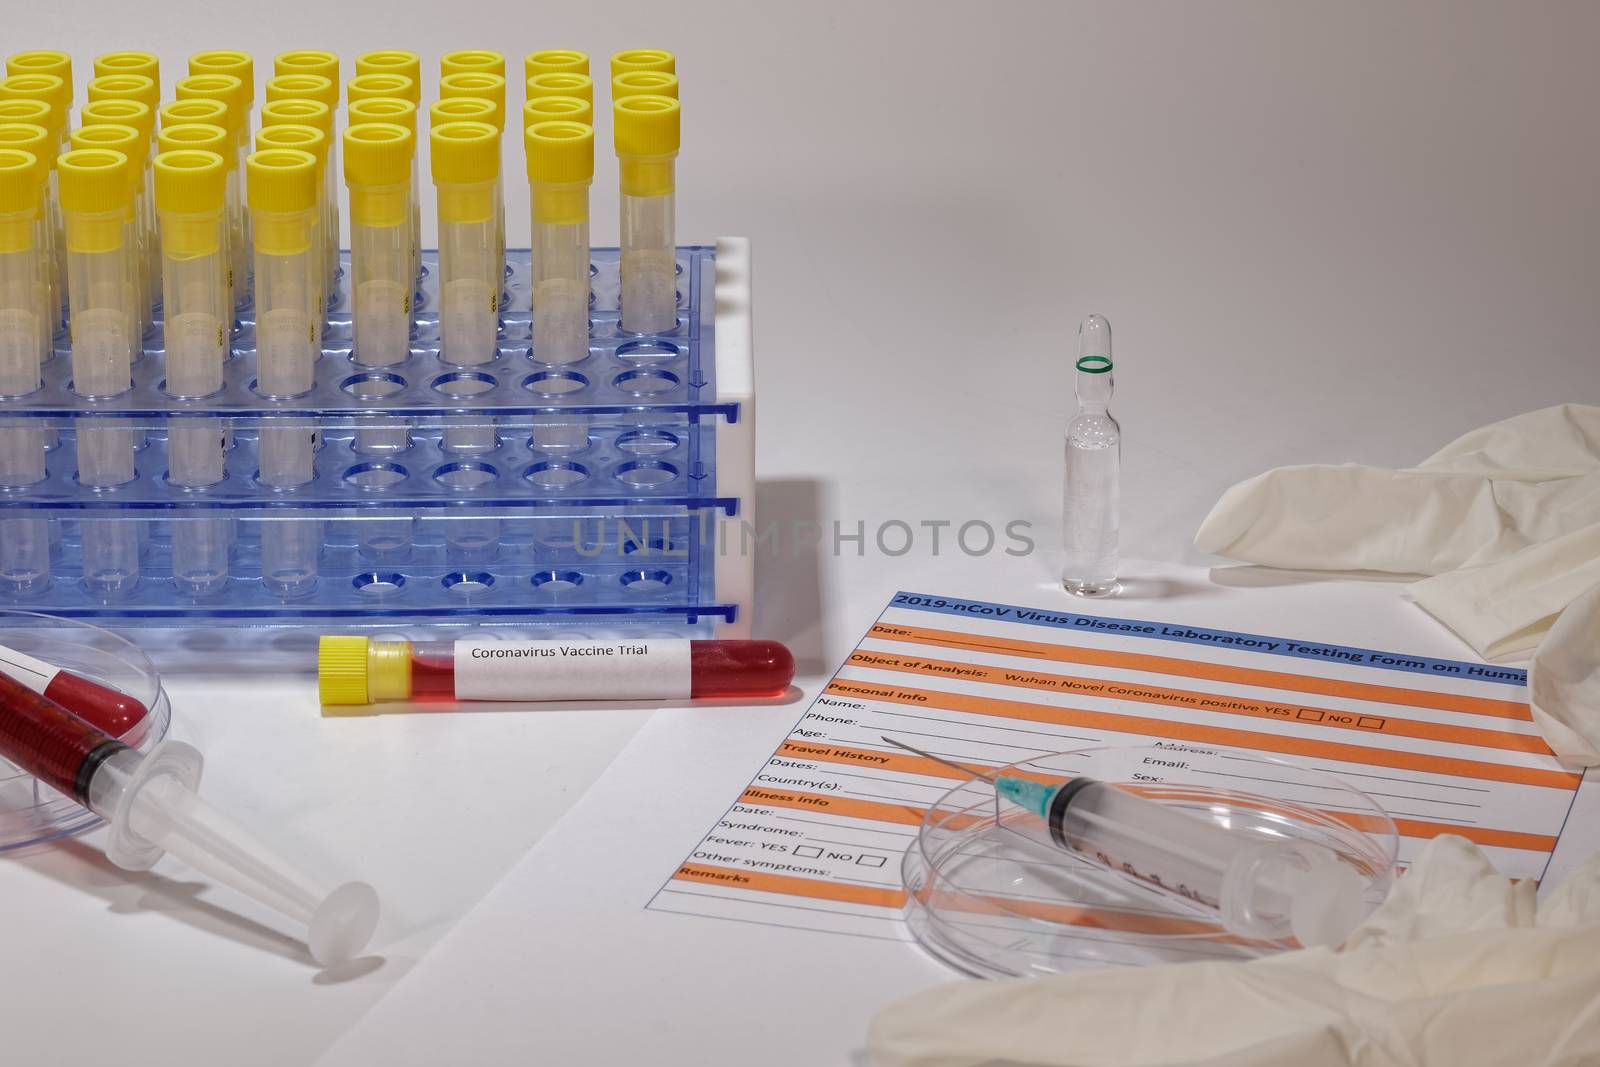 Clinical tests for Wuhan virus with laboratory testing form next to vaccine trial vacutainer blood tube and syringes.